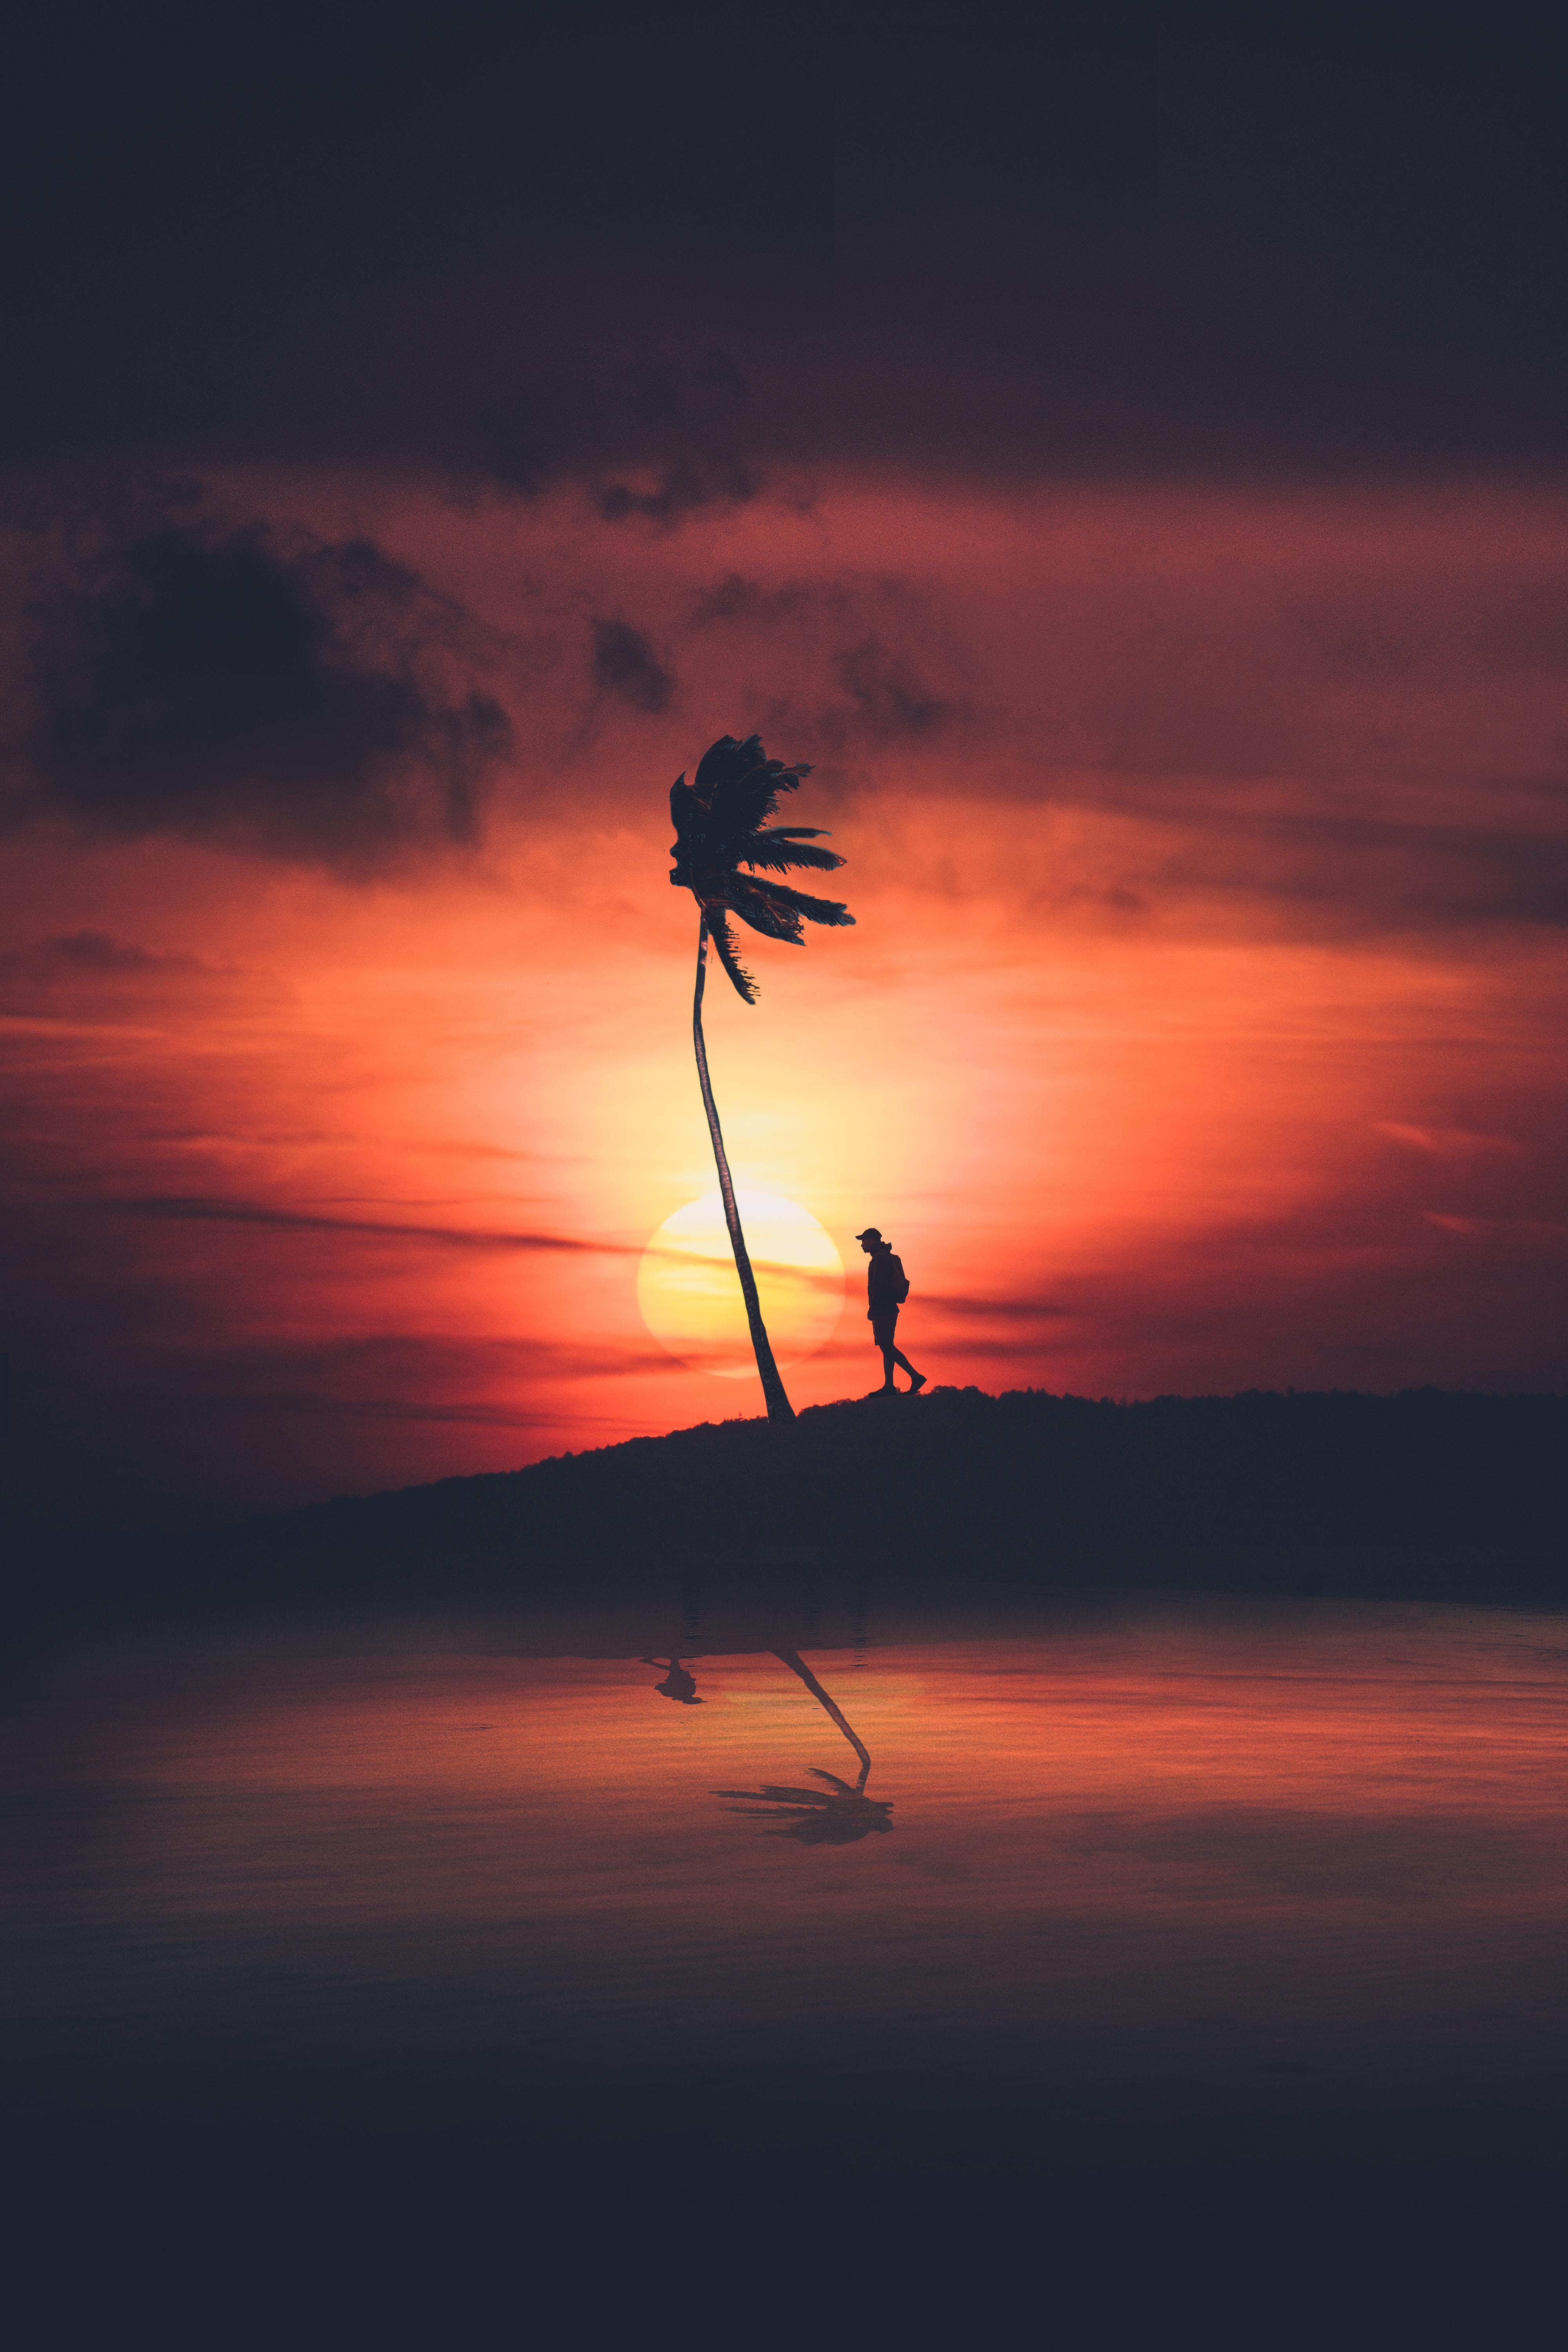 4K, FHD, UHD night, seclusion, silhouette, sunset